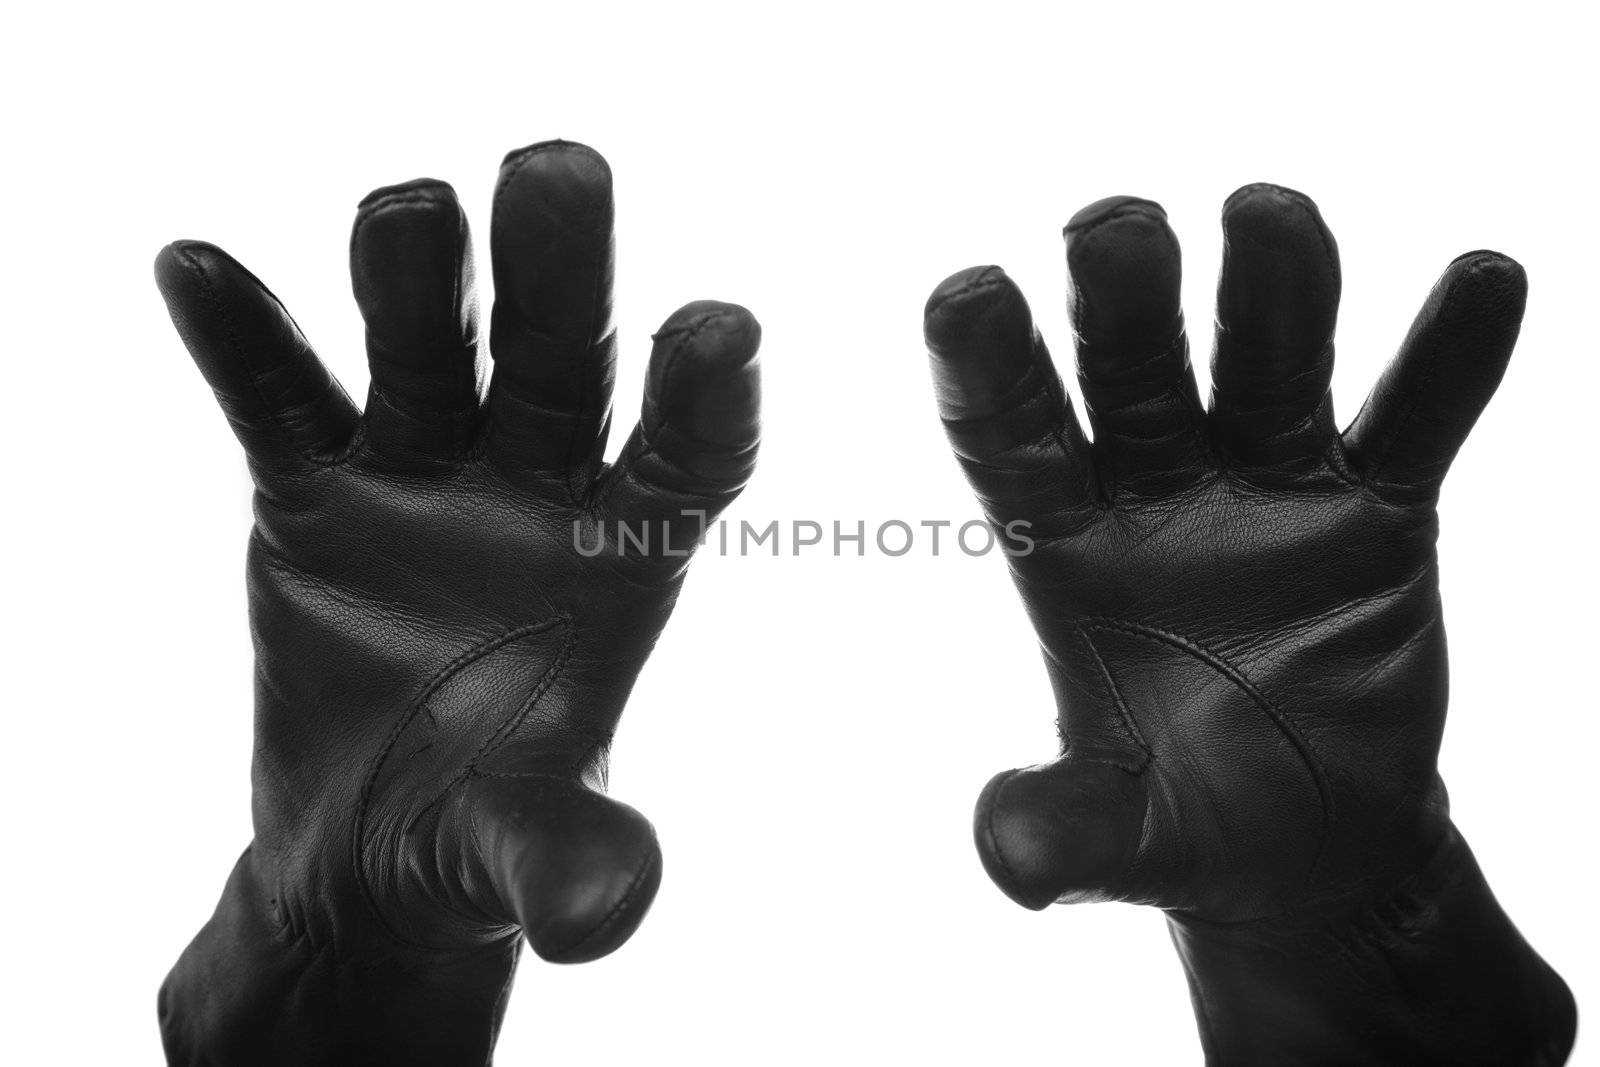 Hands of the criminal person in black leather gloves